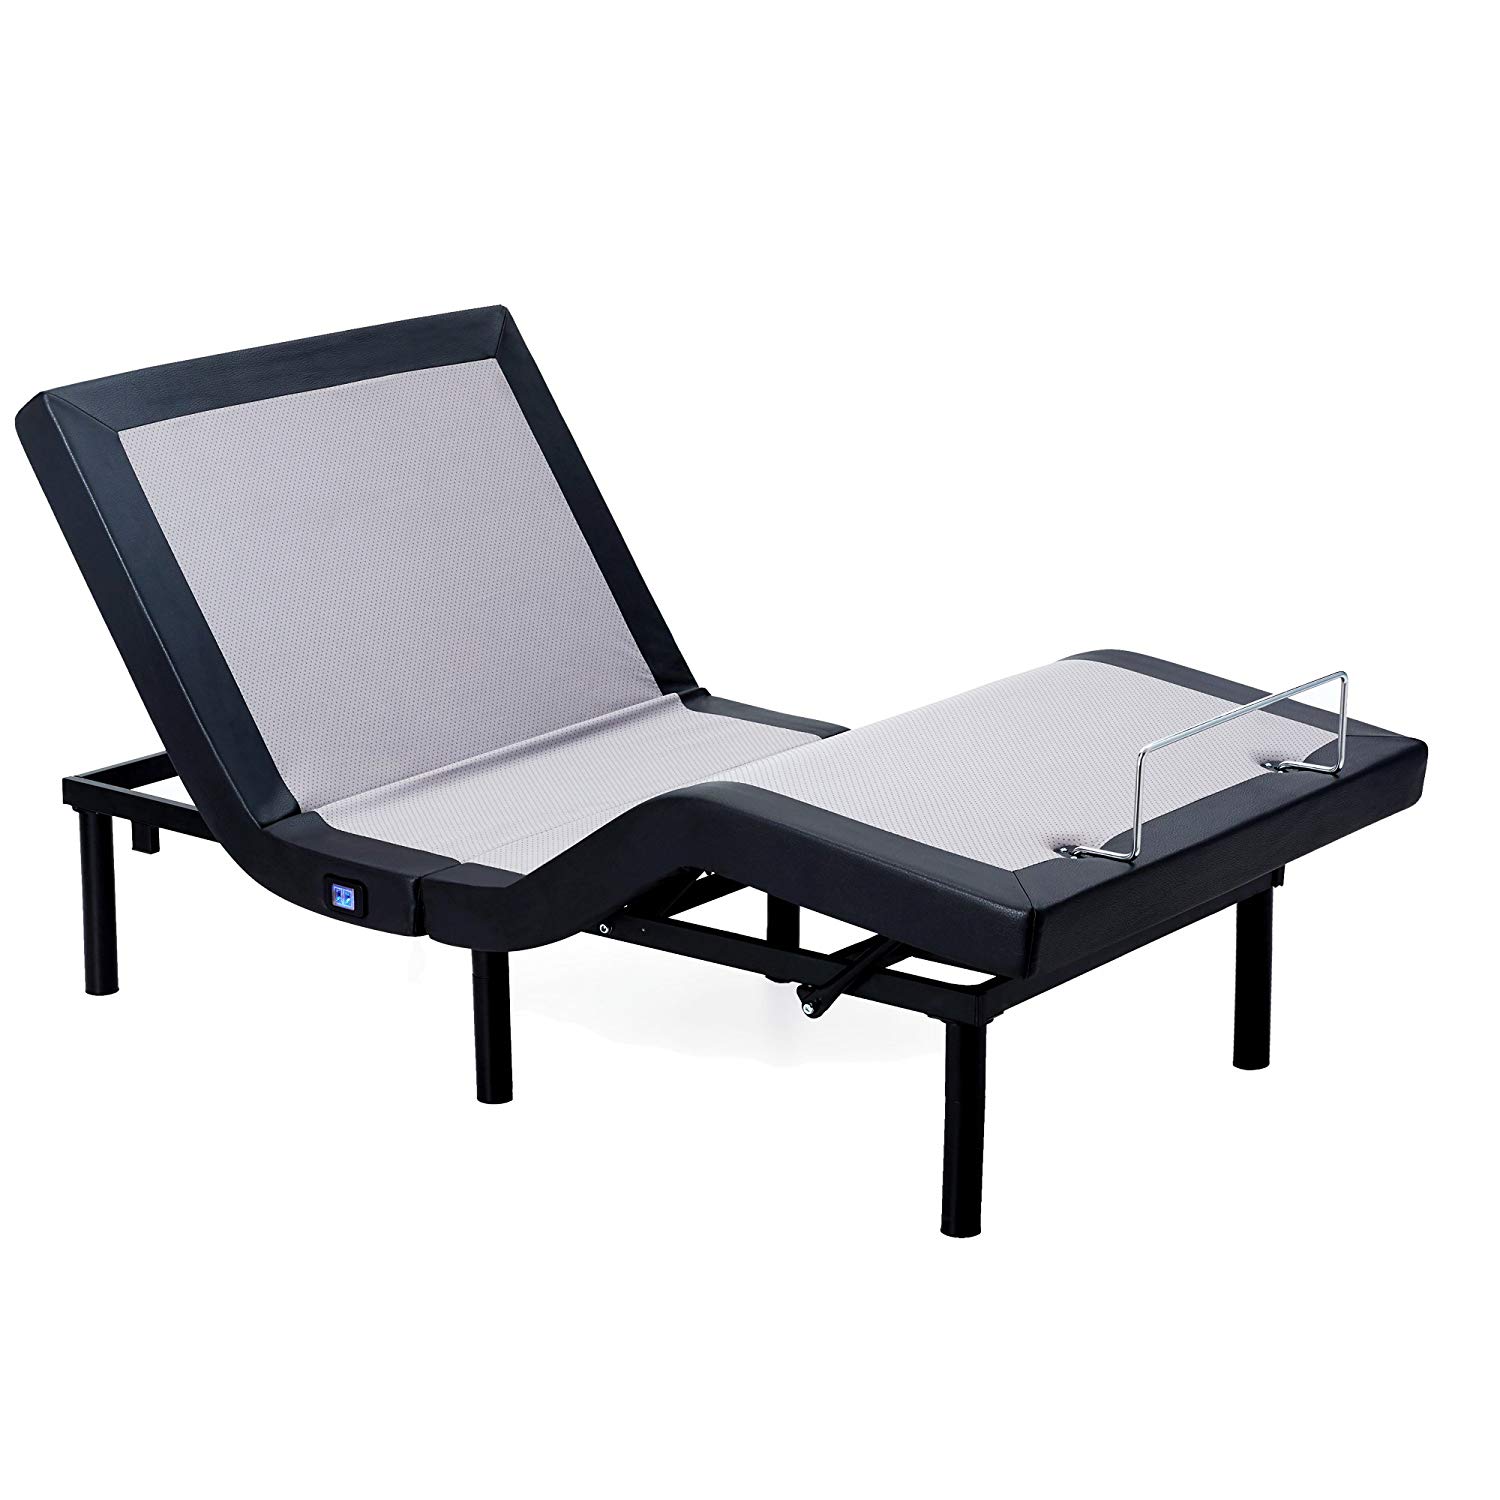 HOFISH One-Step Assembly Customizable Positions Twin XL Solid Wood Slat Adjustable Bed Base with Backlit Wireless Remote&USB Ports Twin Xl.